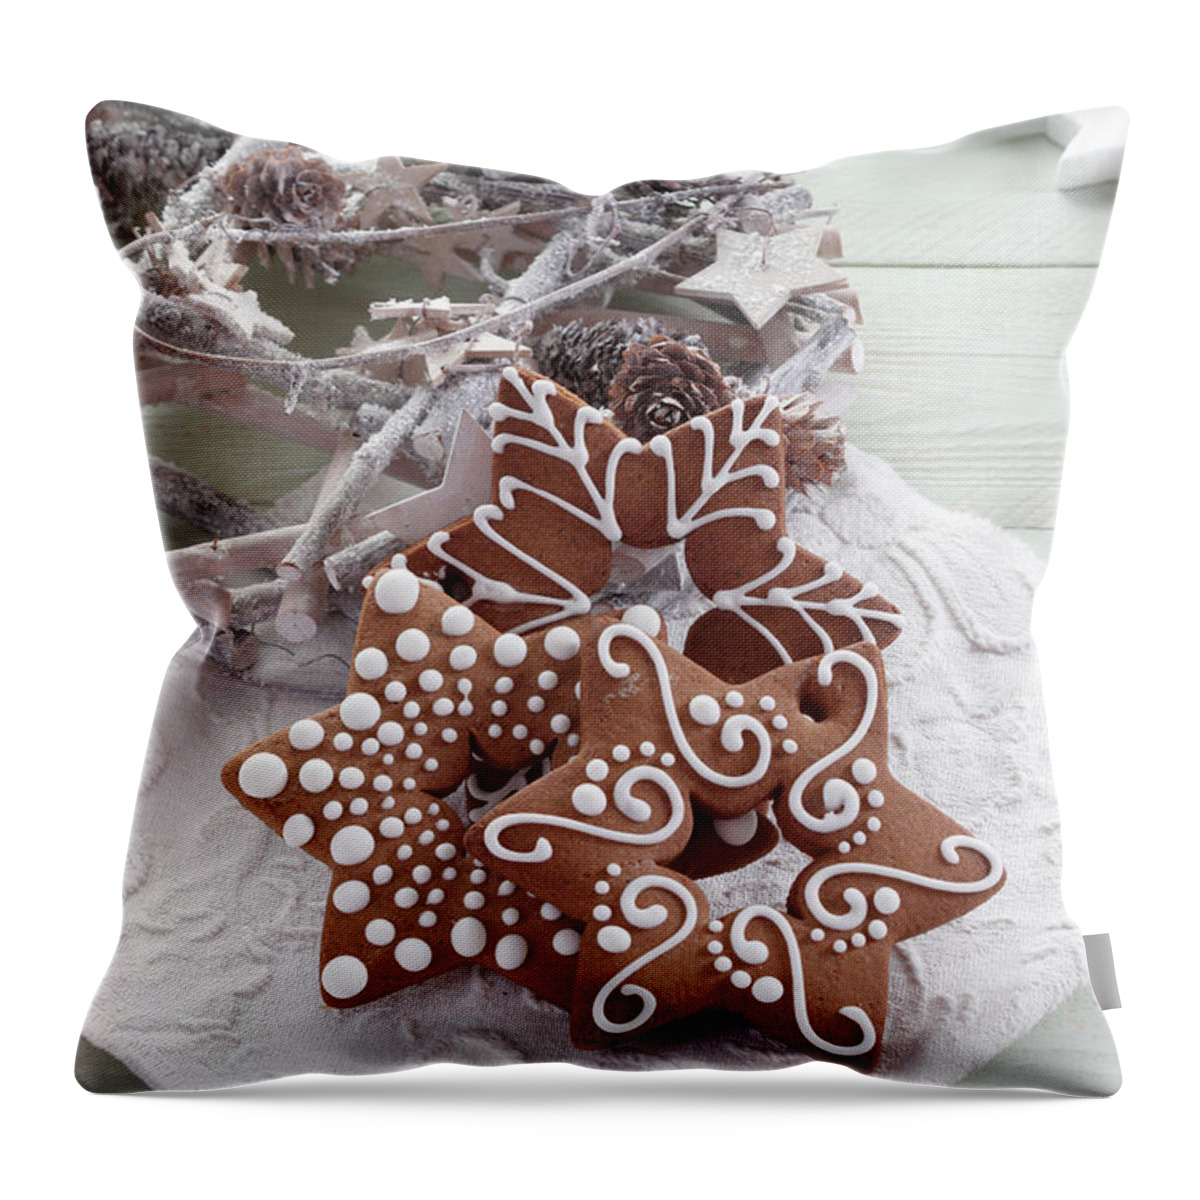 Throw Pillows Set 4 Couch, Cookie Cushions, Biscuit Cushion, Food Cushion